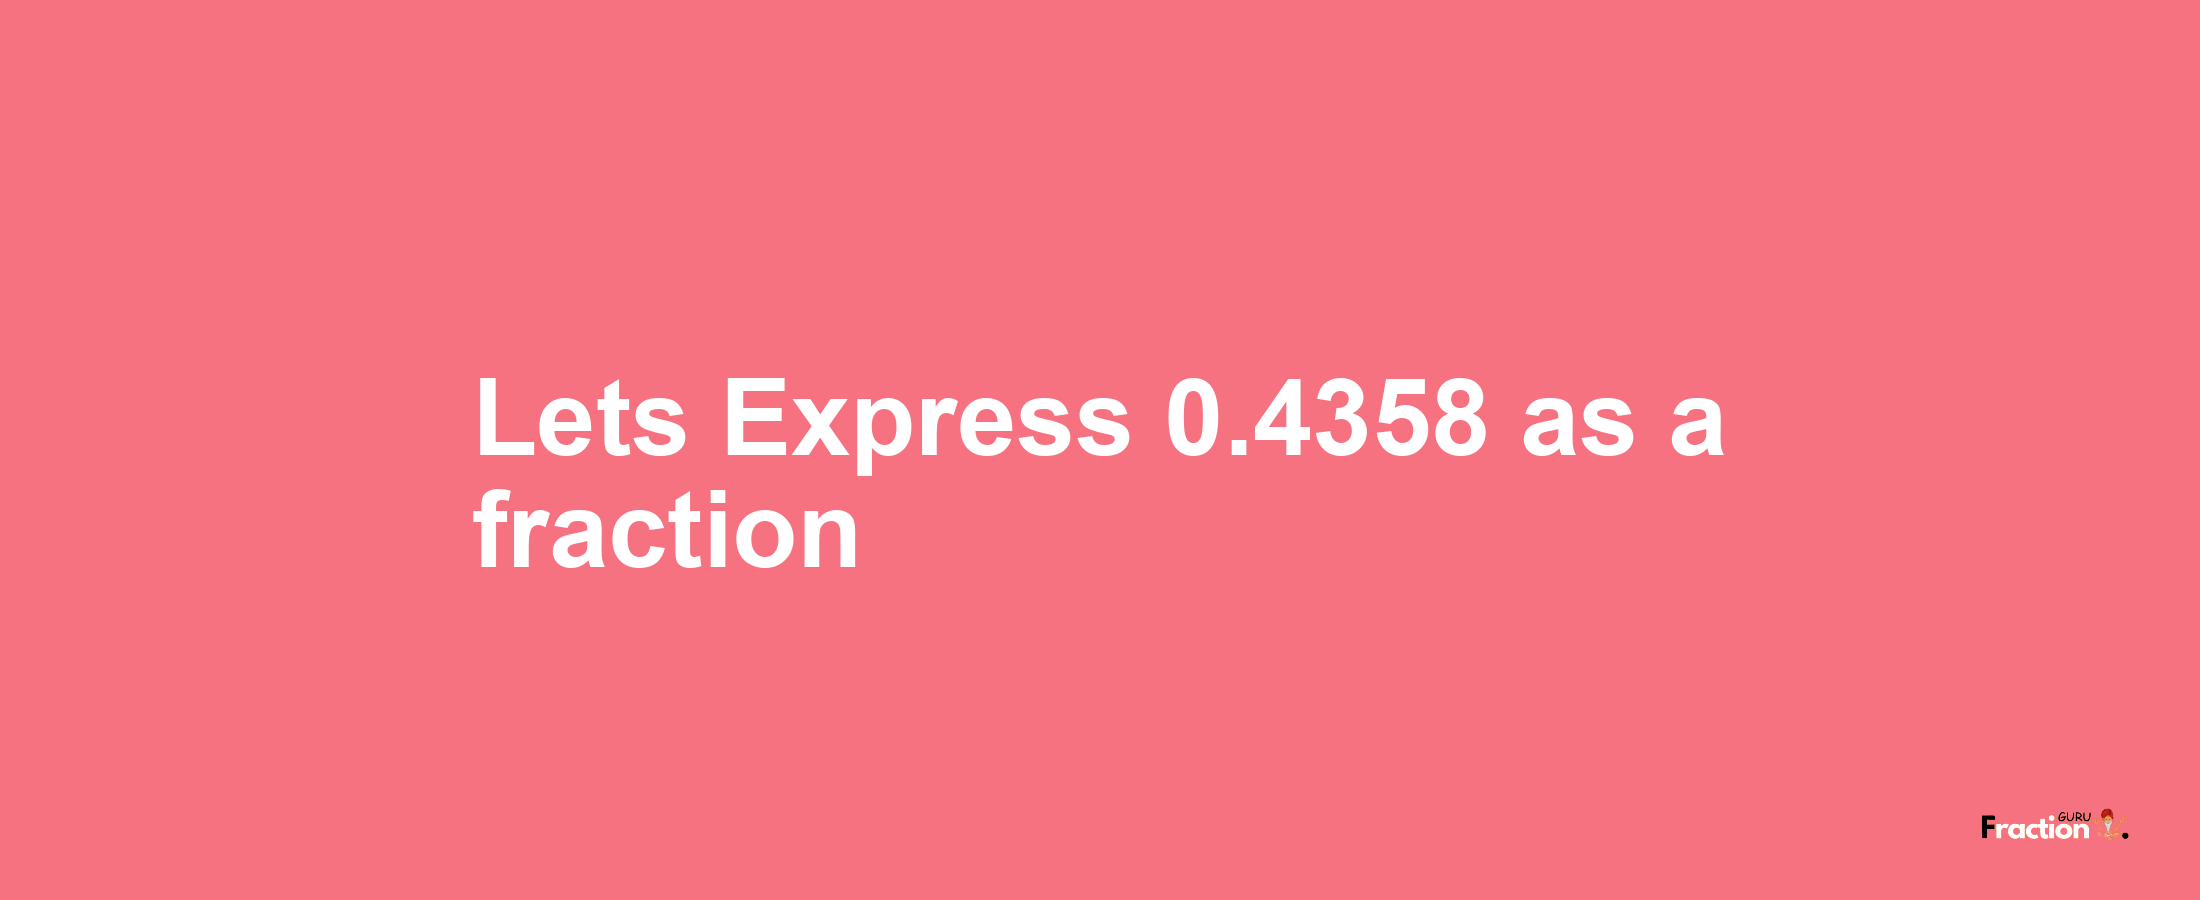 Lets Express 0.4358 as afraction